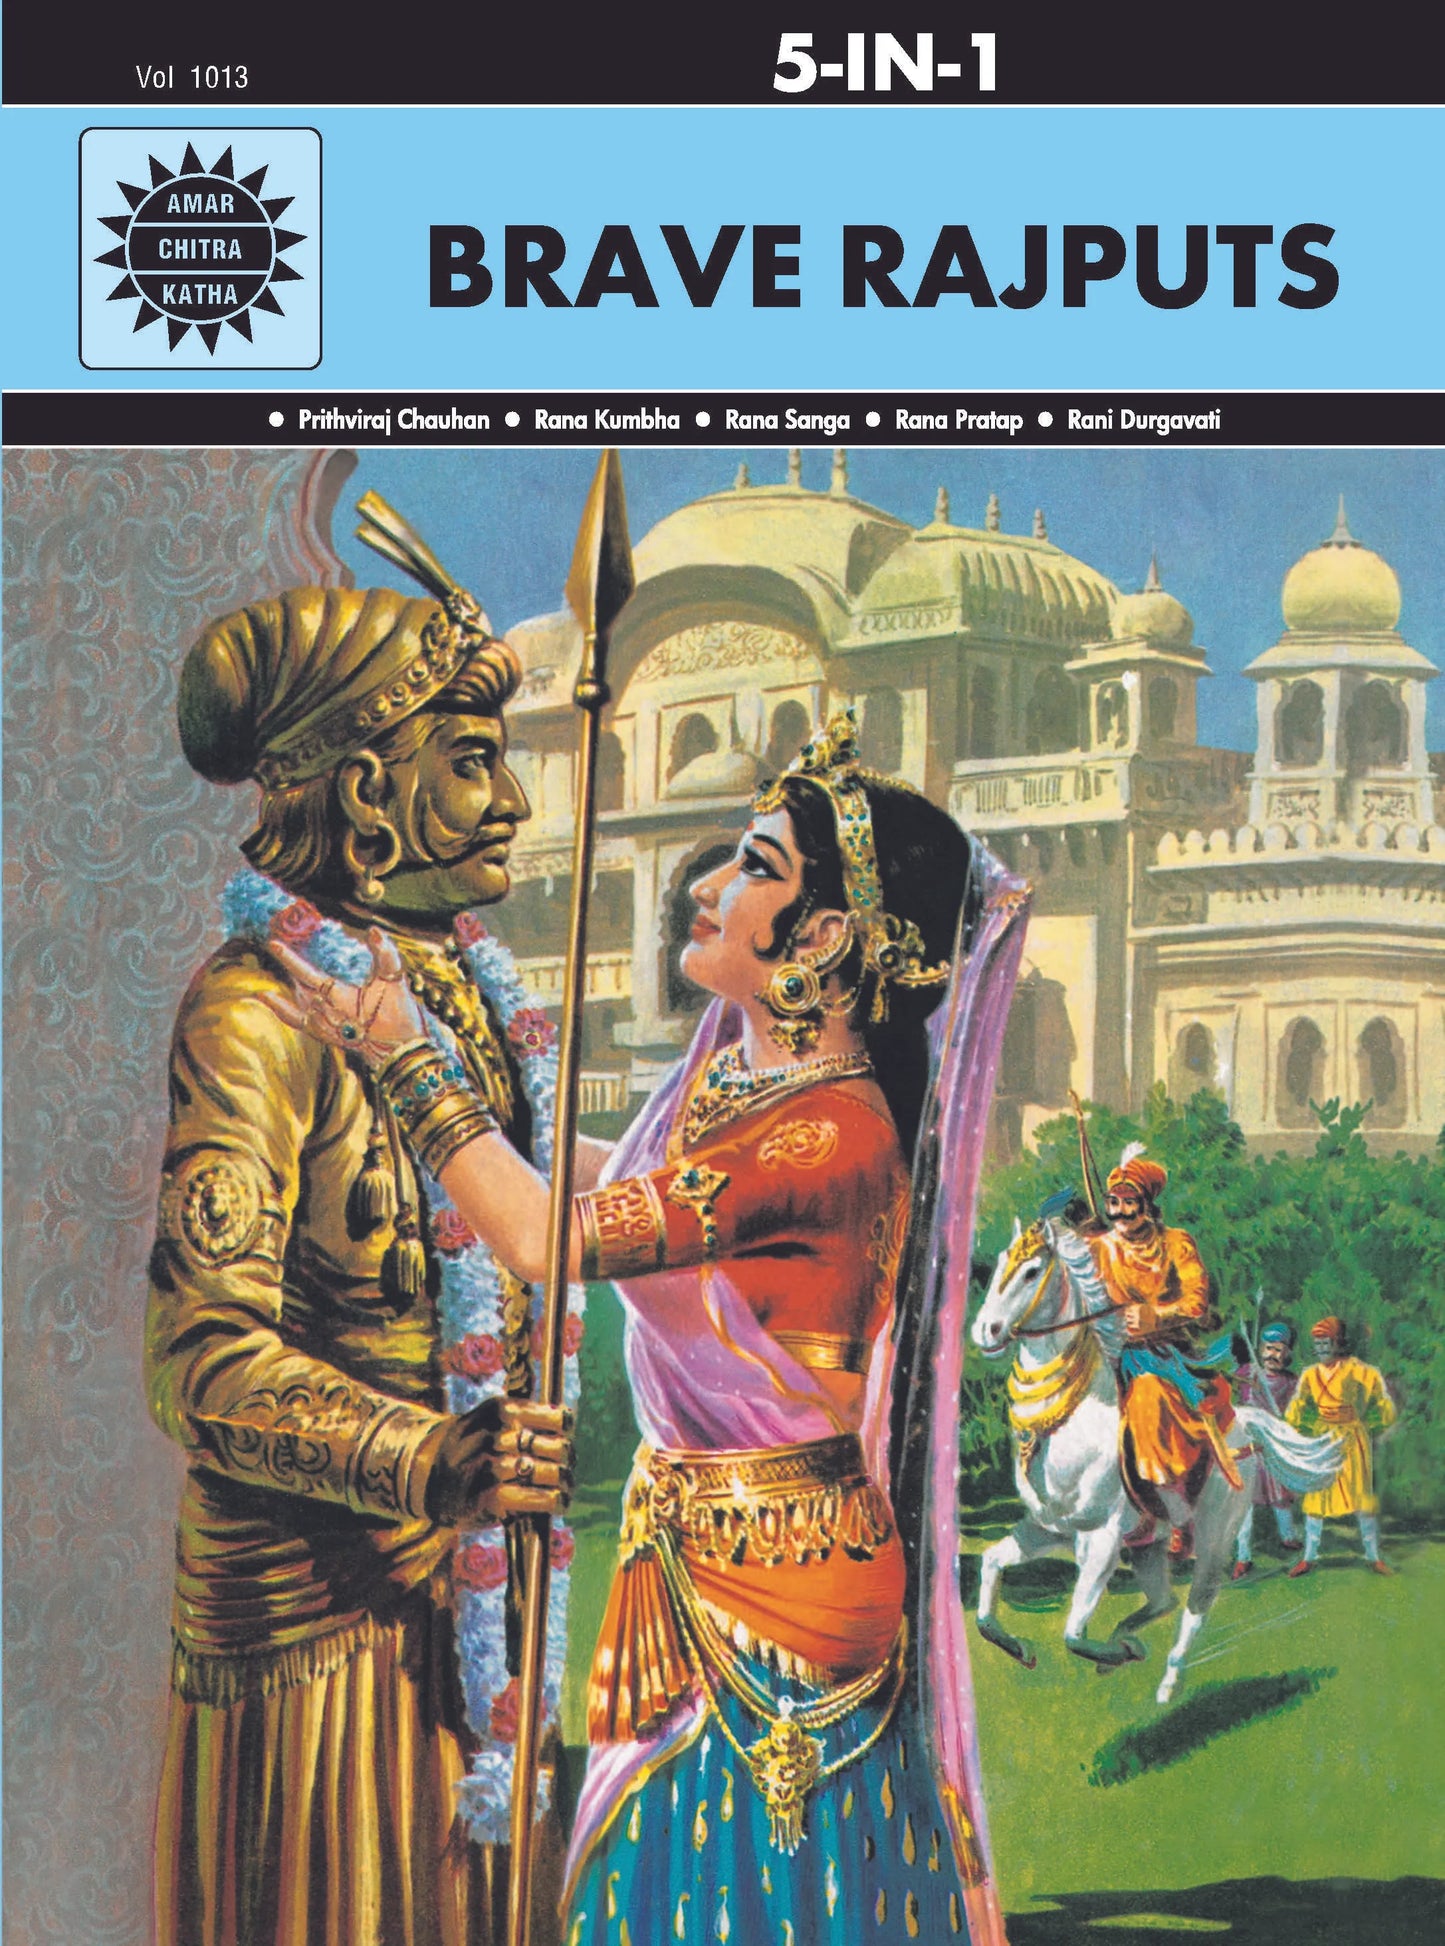 Amar Chitra Katha - Brave Rajputs 5 in 1  By Anant Pai - English